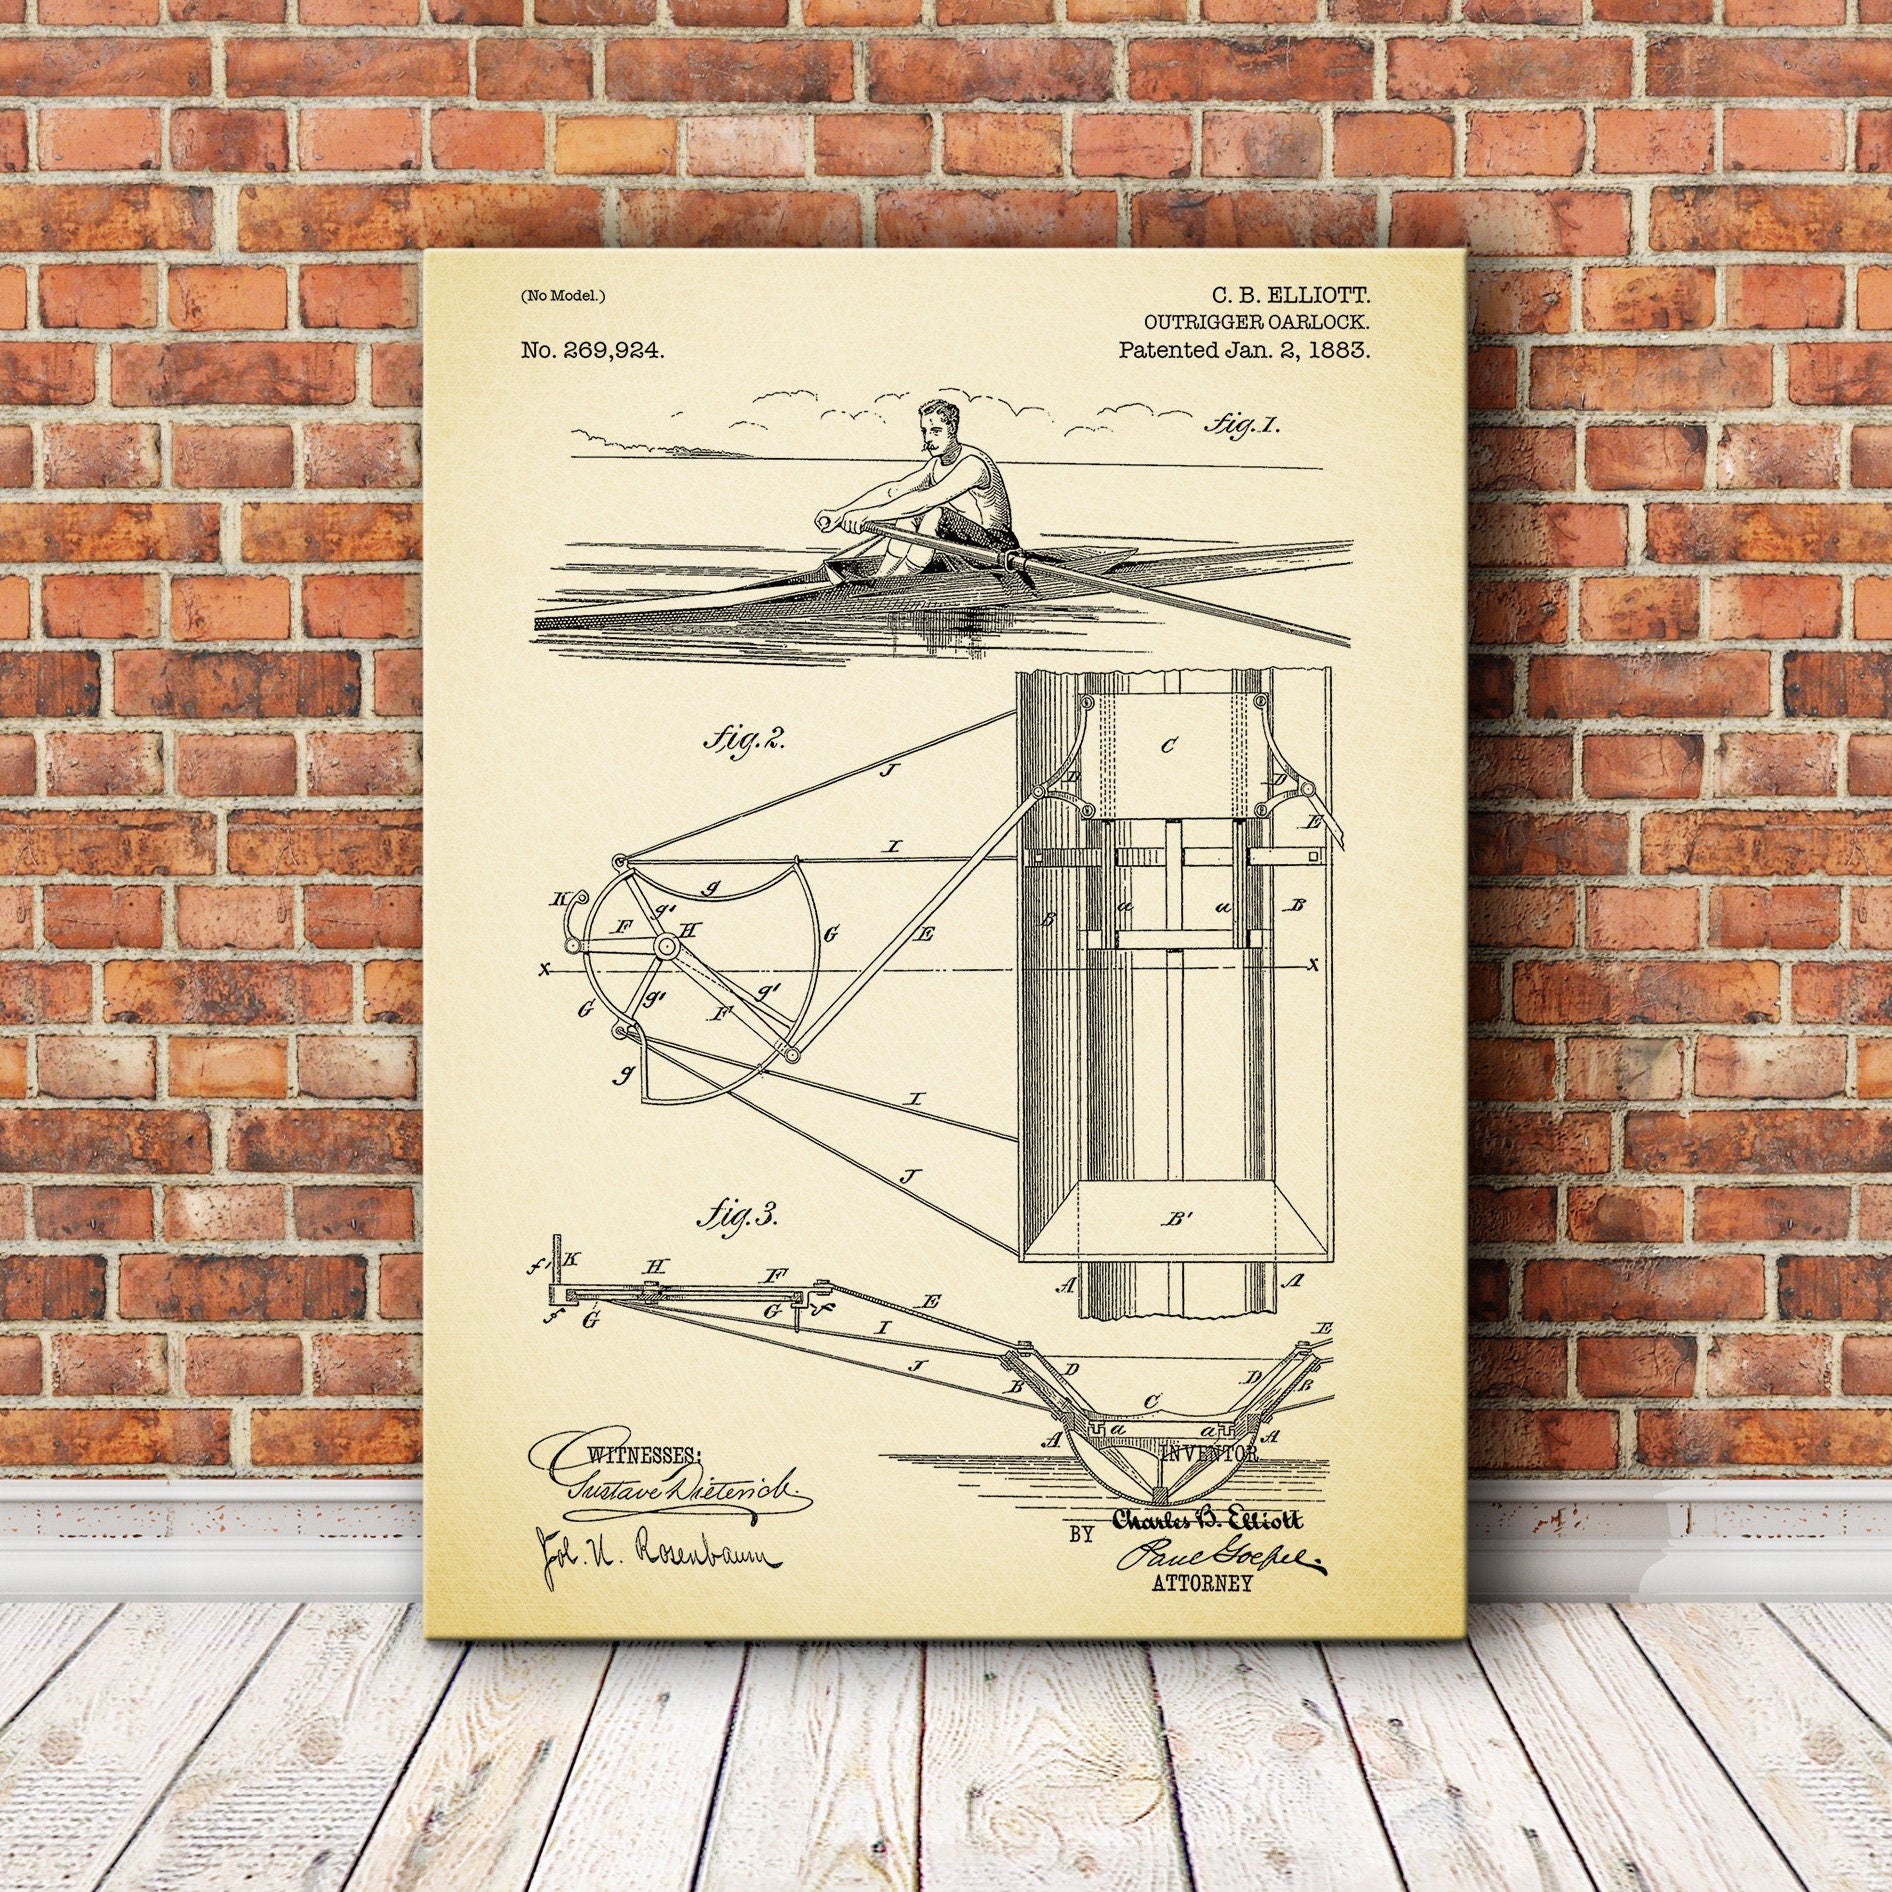 Nautical Patent print, Outrigger Oarlock for Nautical Patent print, Patent print, Patent print design, Vintage patent print, Nautical Art